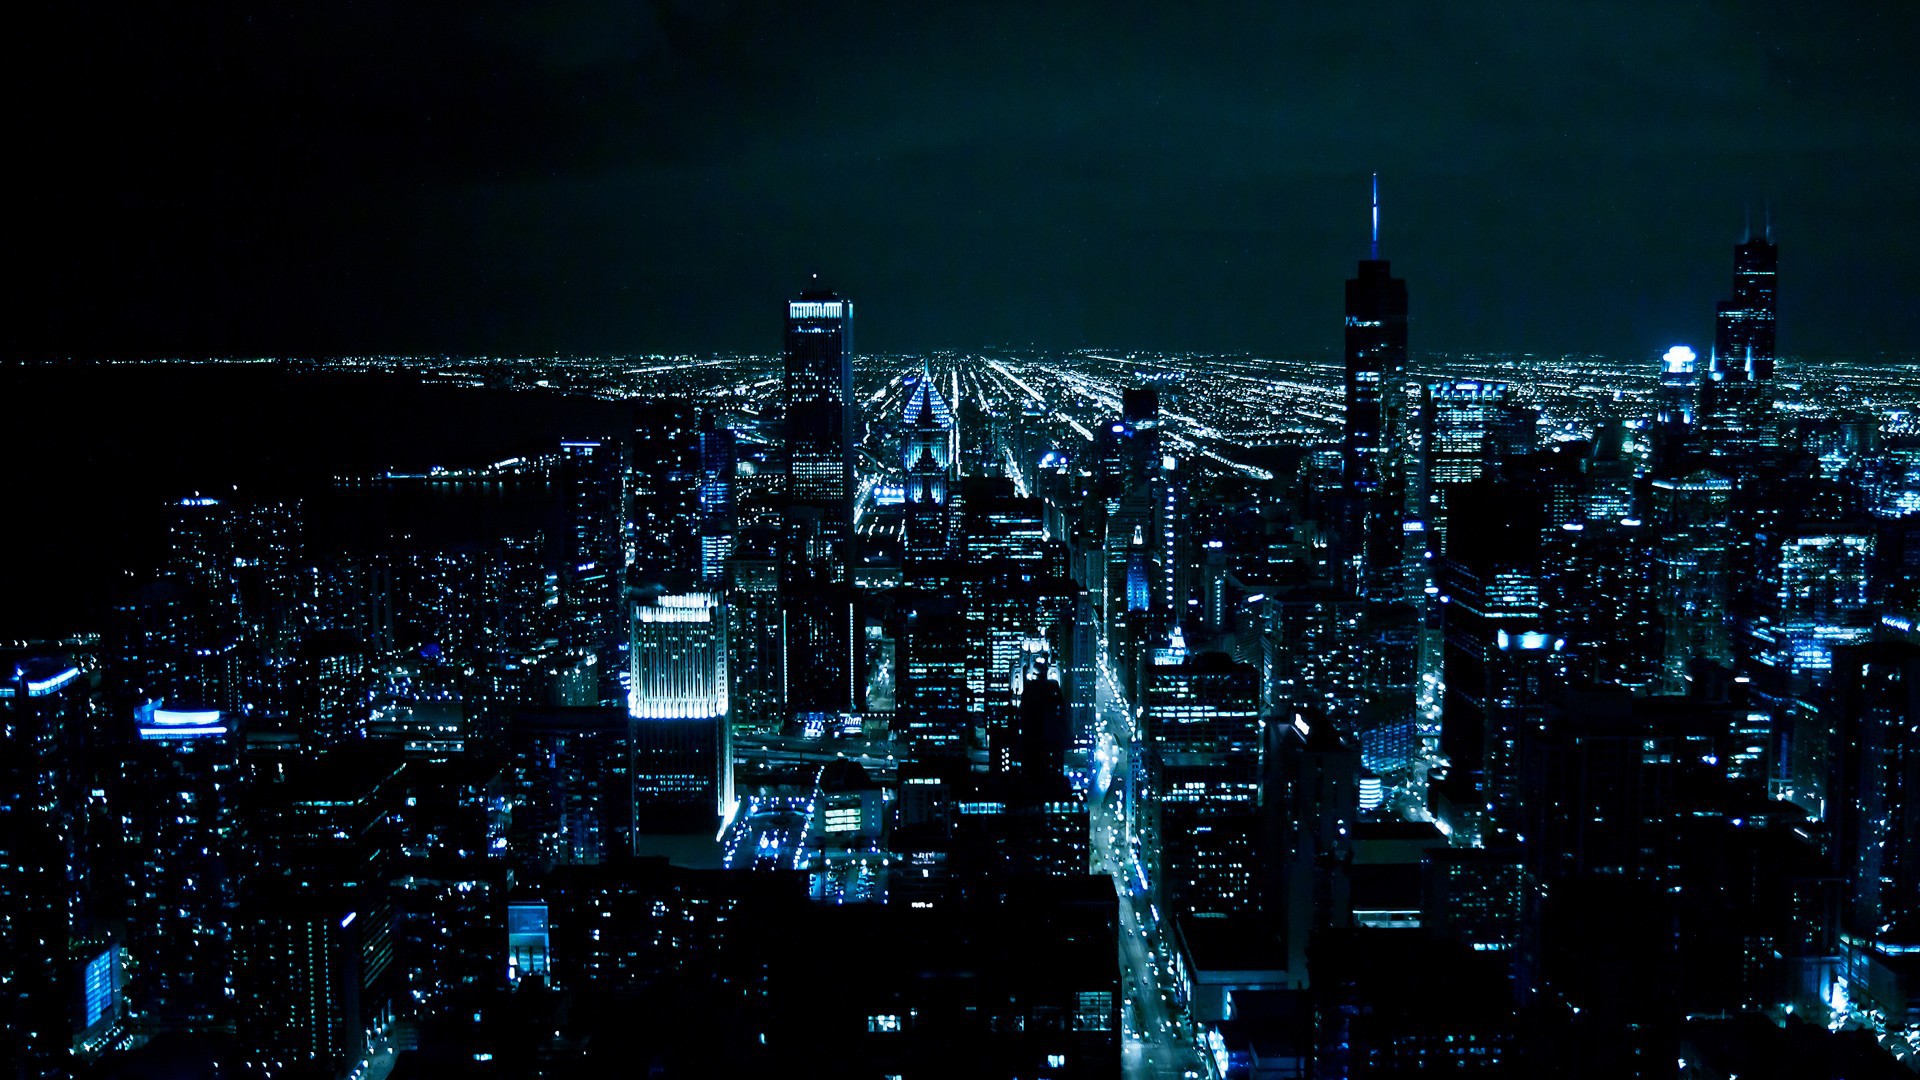 Free download Night Night city Chicago Skyscraper wallpaper and image [1920x1080] for your Desktop, Mobile & Tablet. Explore Cities at Night Wallpaper. City Night Wallpaper HD, City Lights